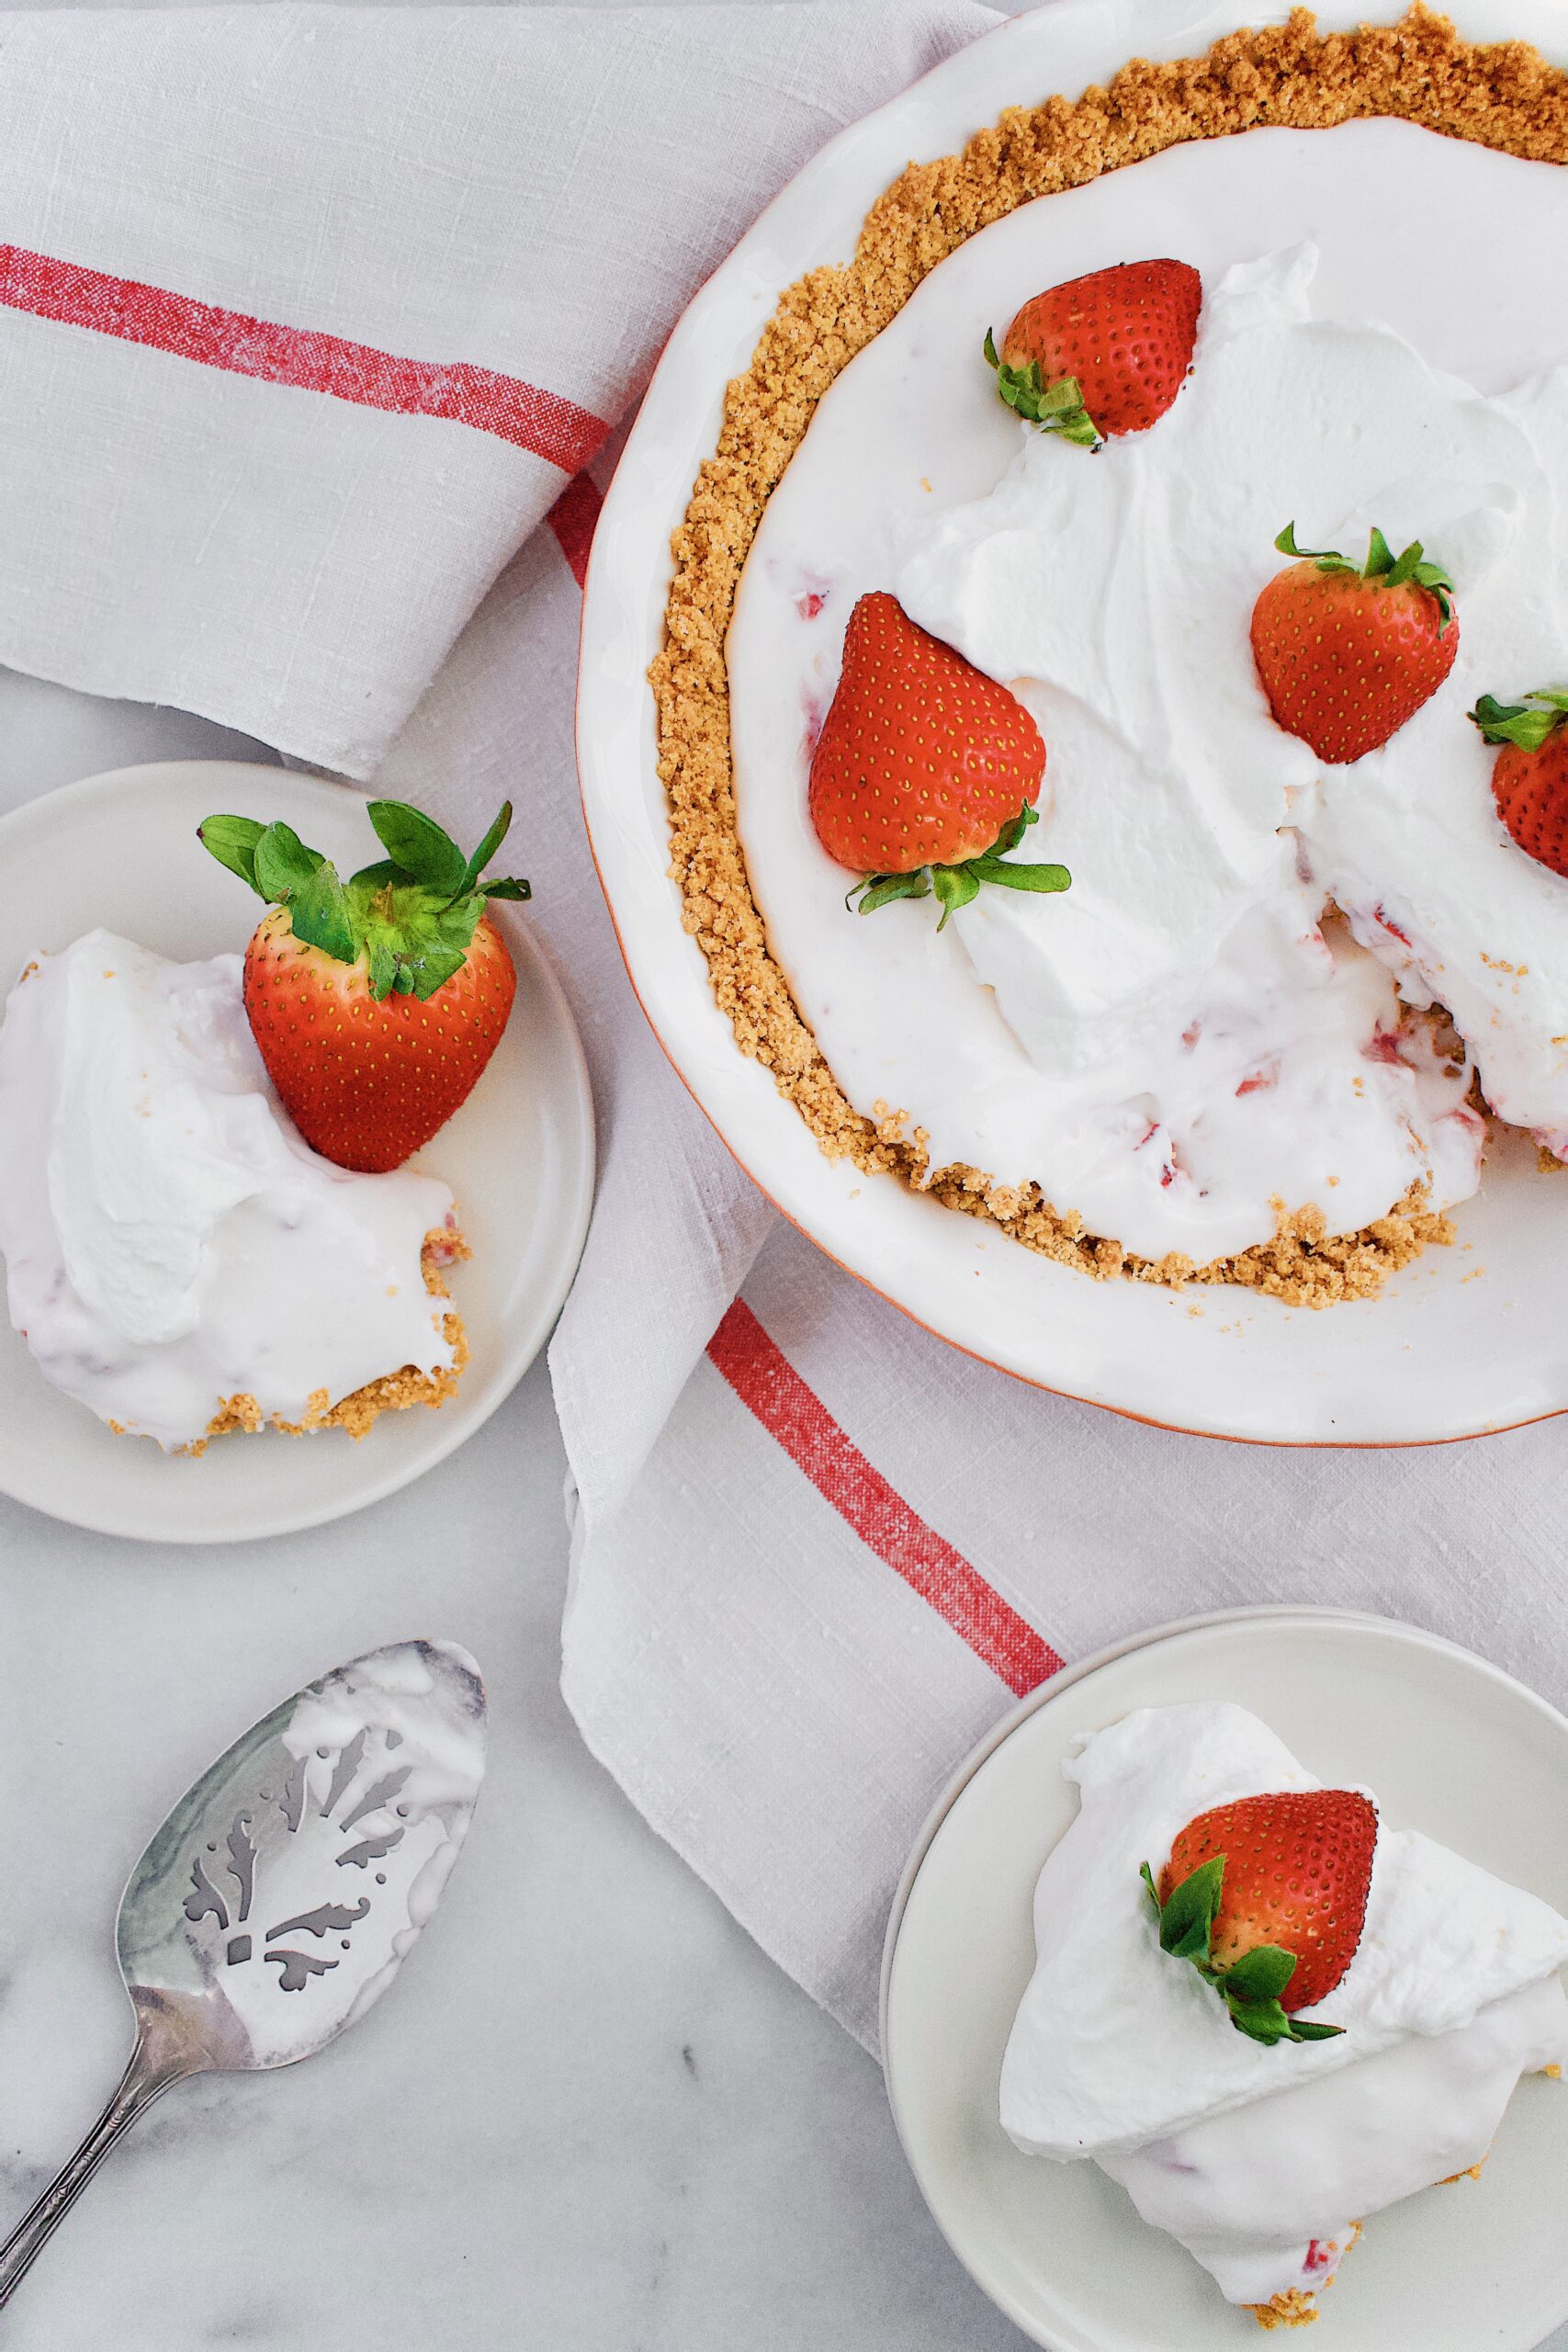 Joanna Gaines Strawberry Pie from the Magnolia Table Cookbook